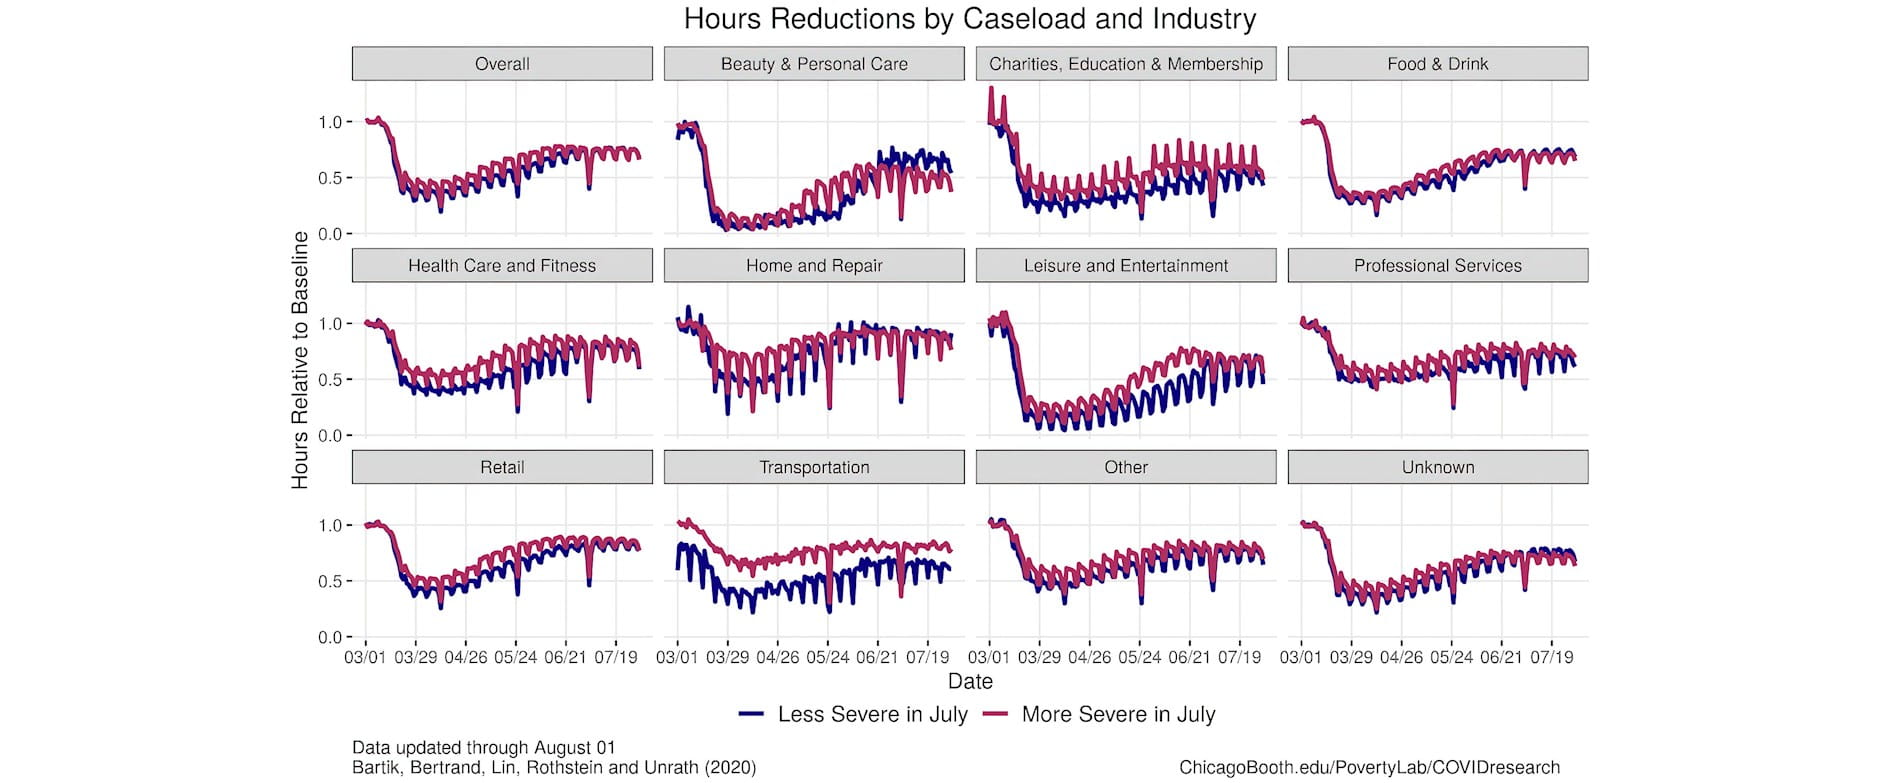 Line graphs showing hours reductions relative to industry